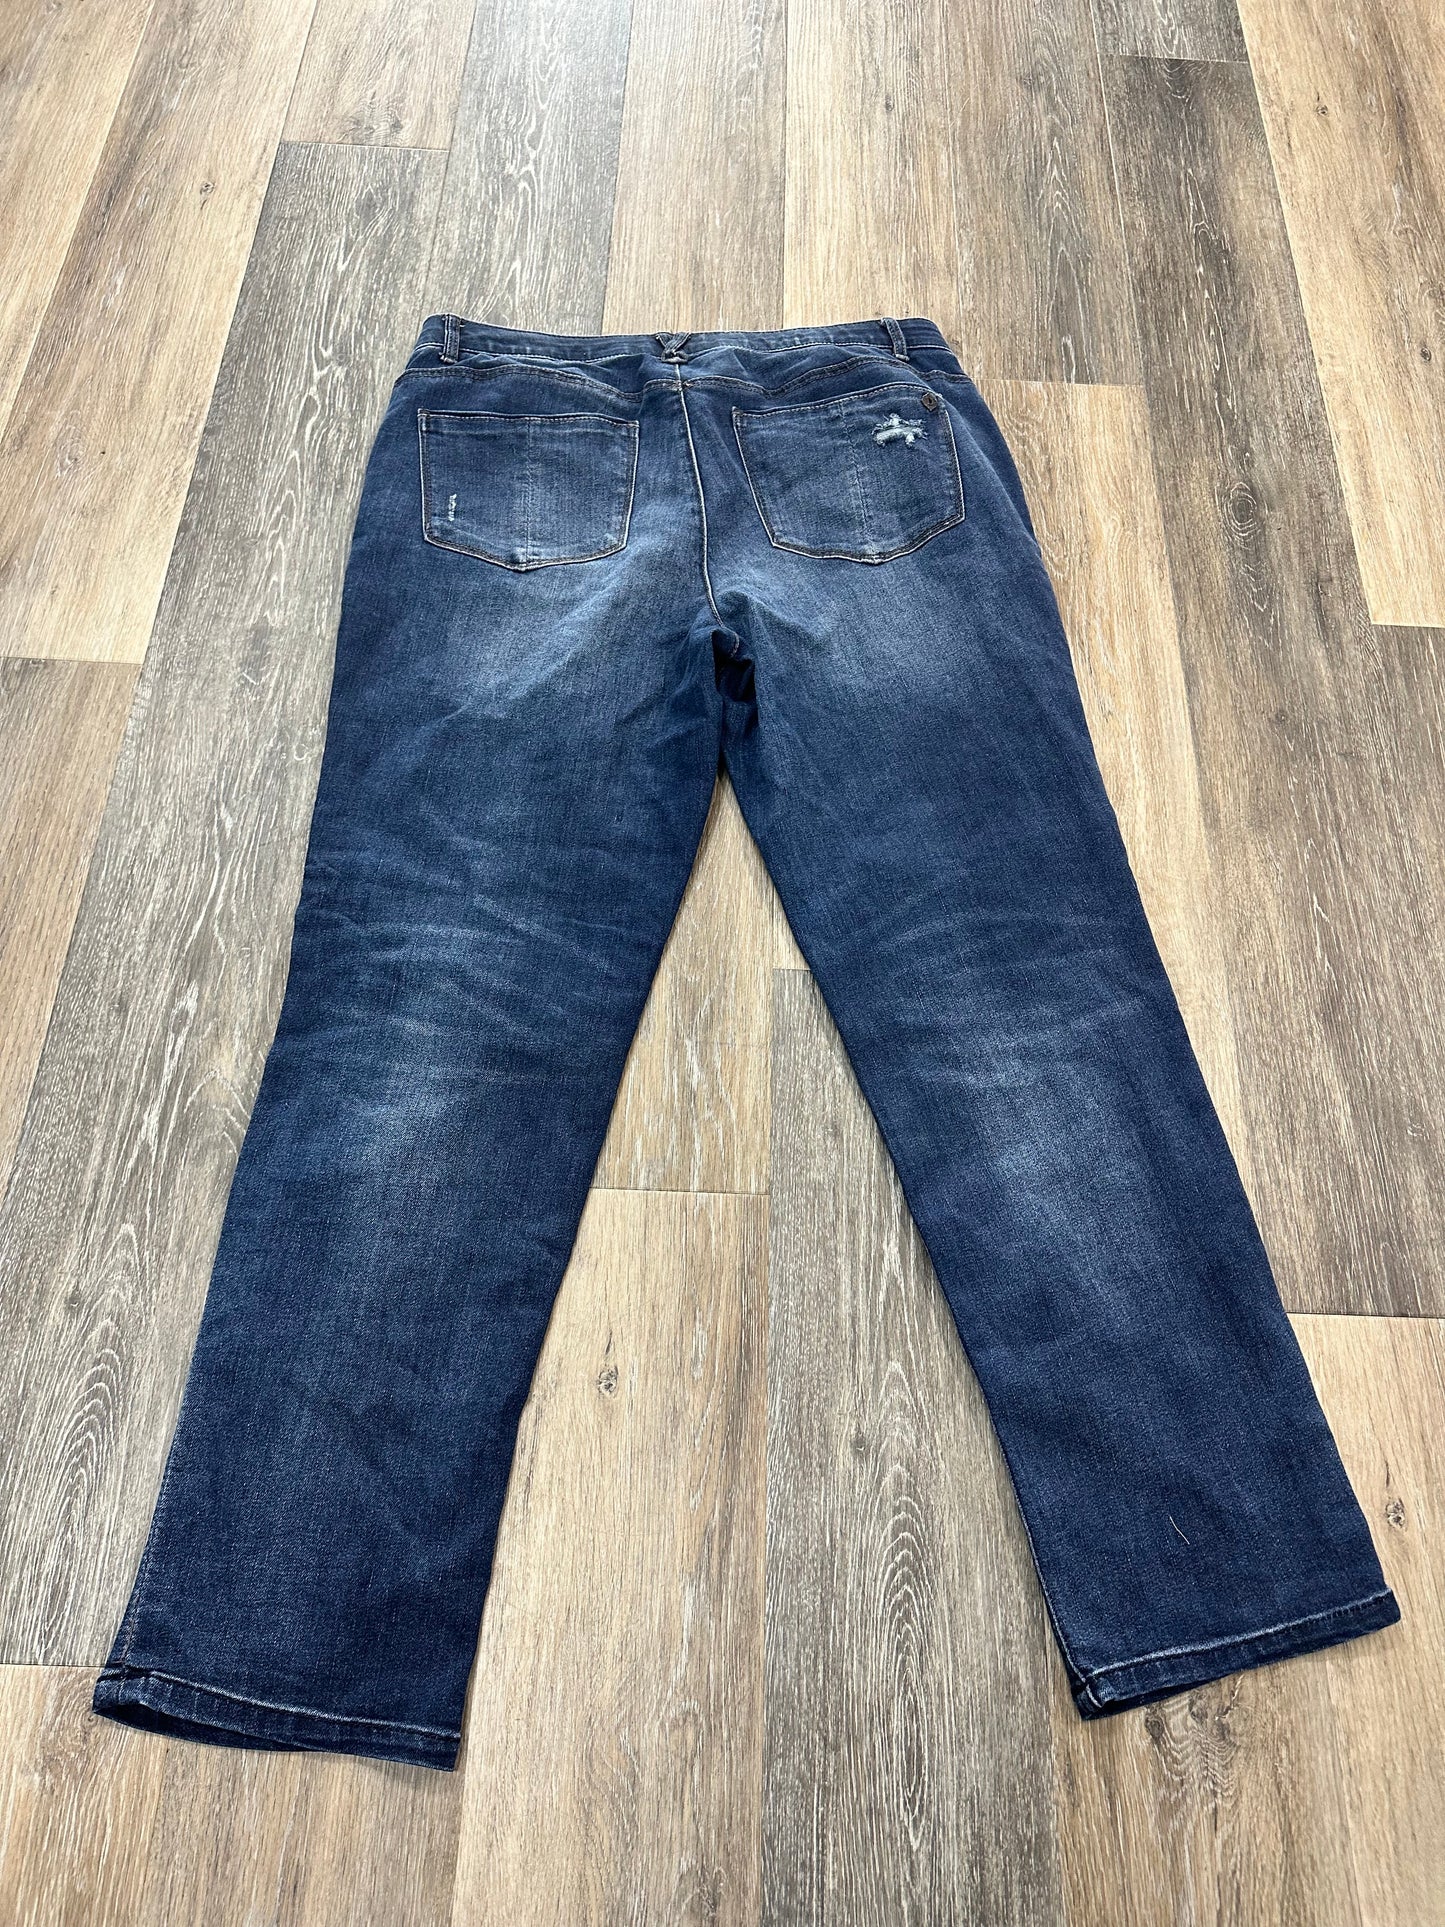 Jeans Straight By Democracy  Size: 14